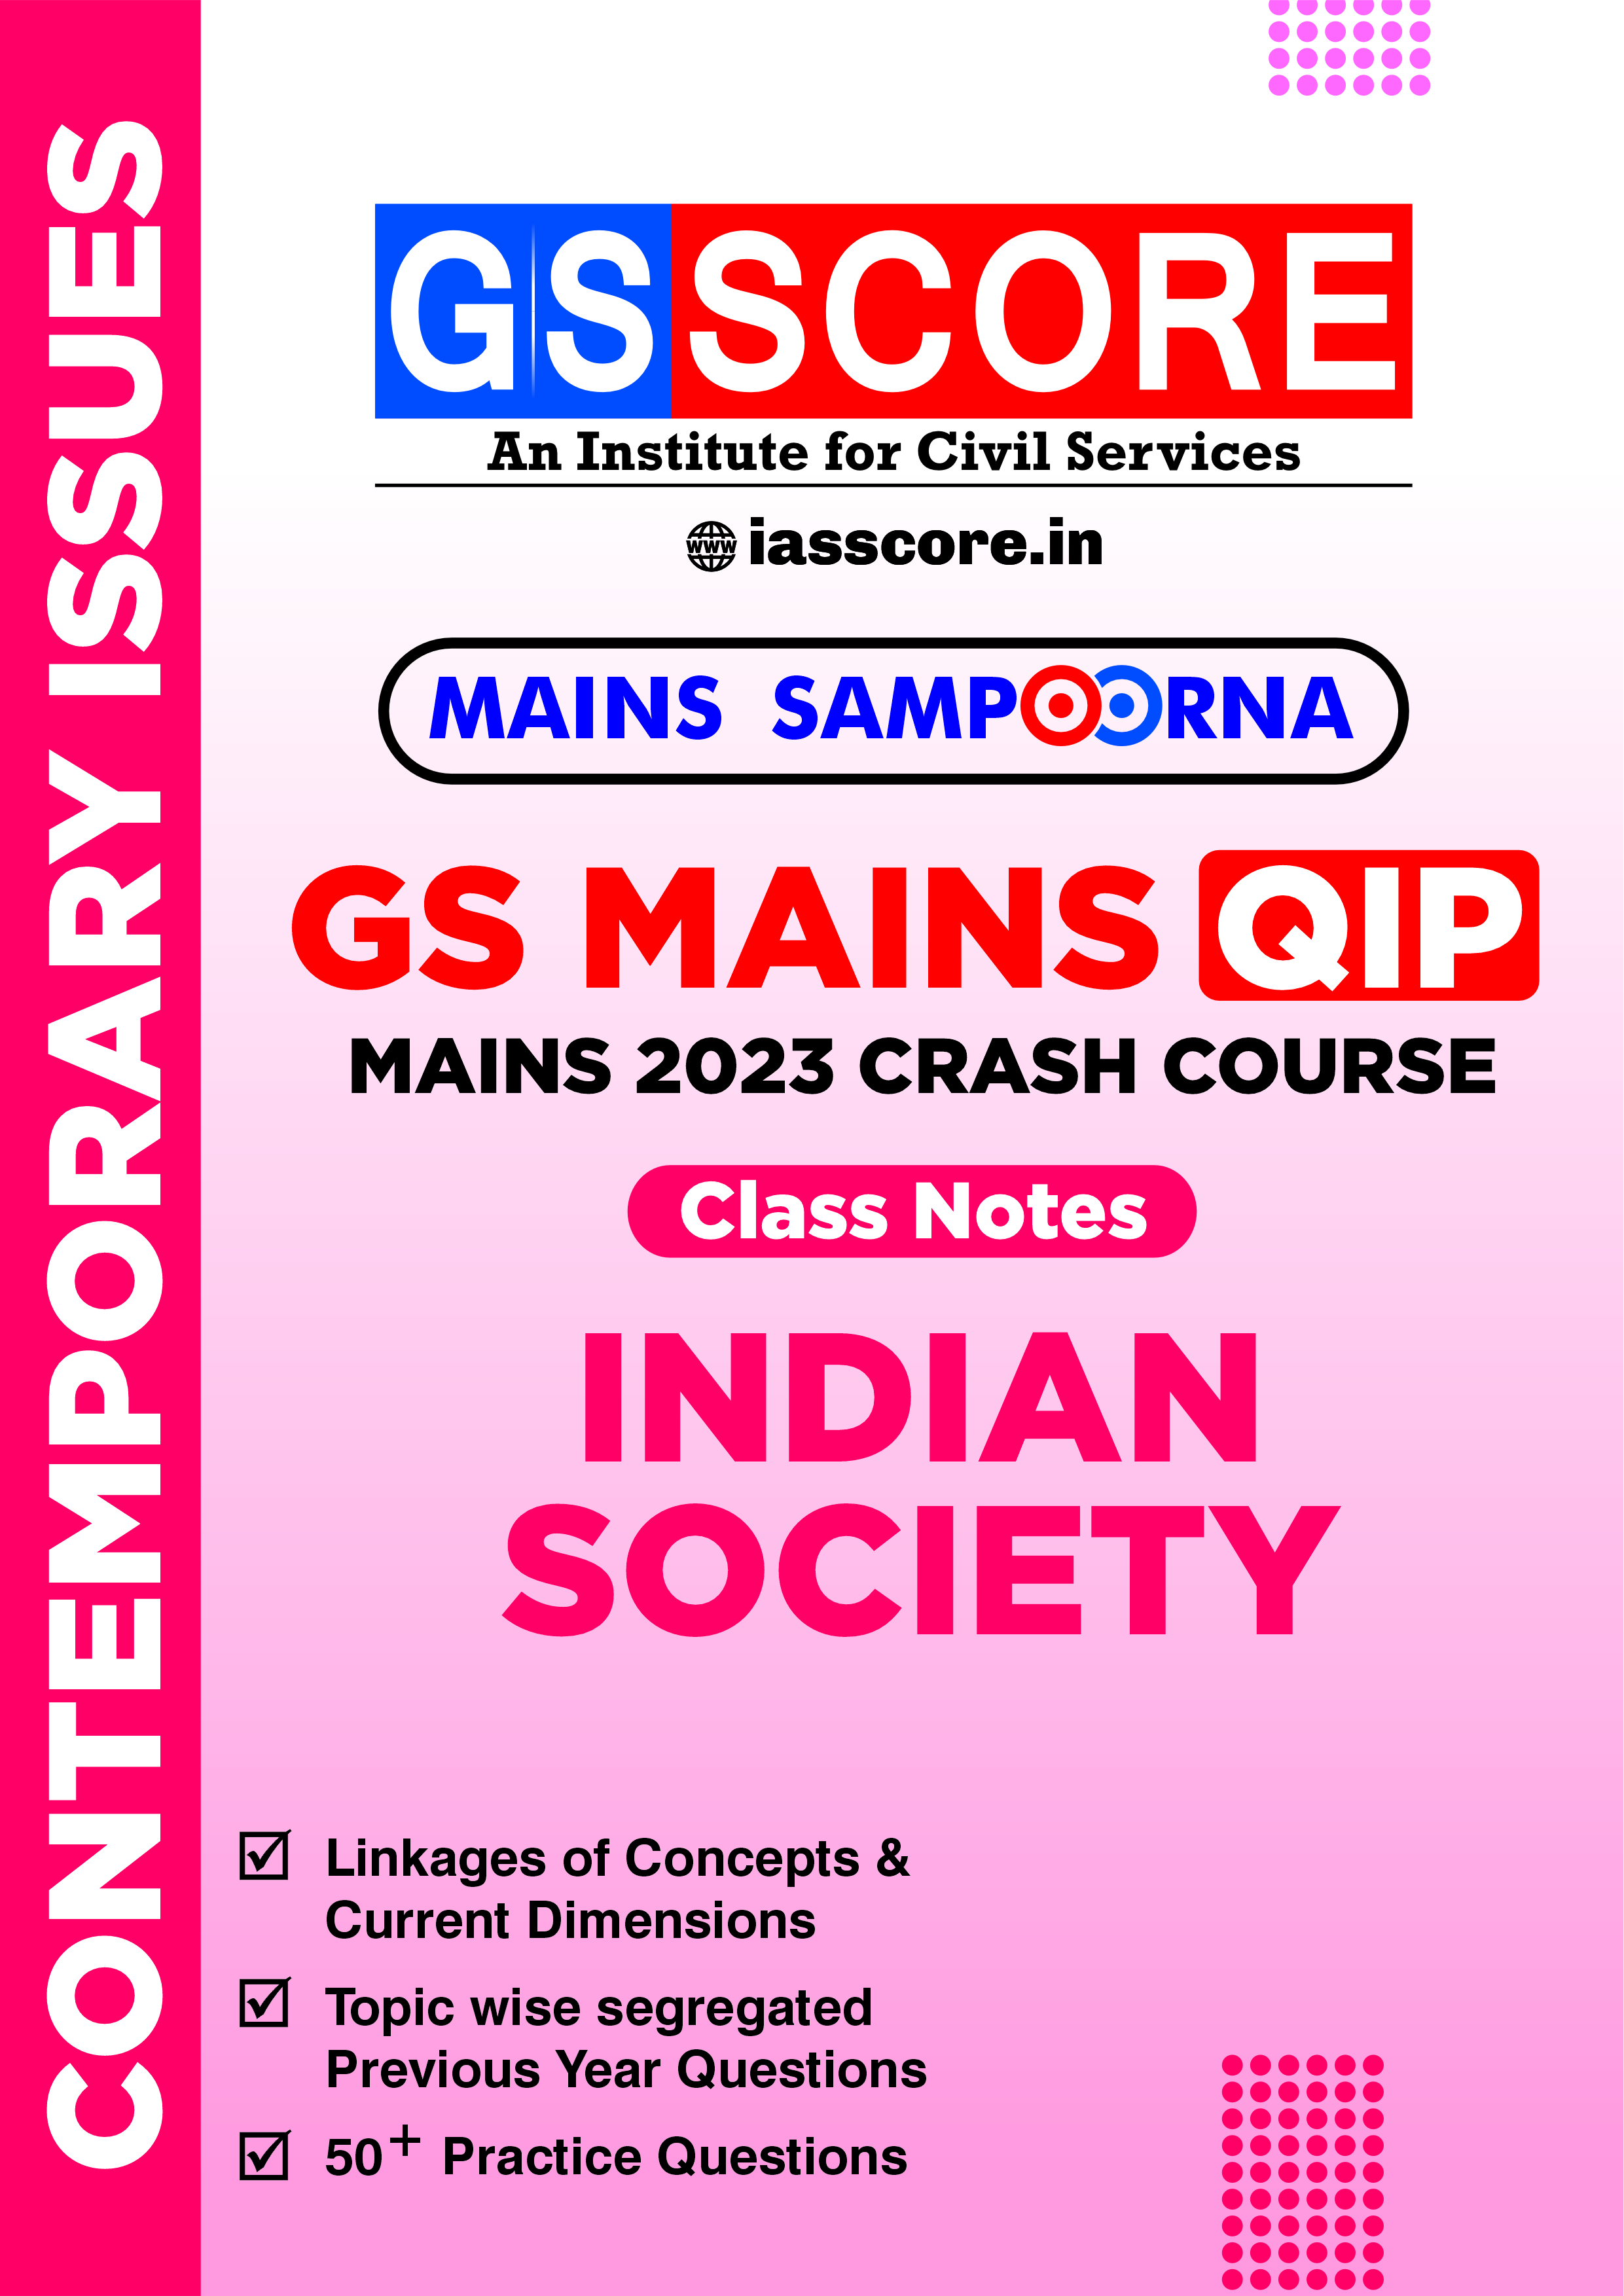 Mains Sampoorna: UPSC Current Affairs Compilation - Indian Society